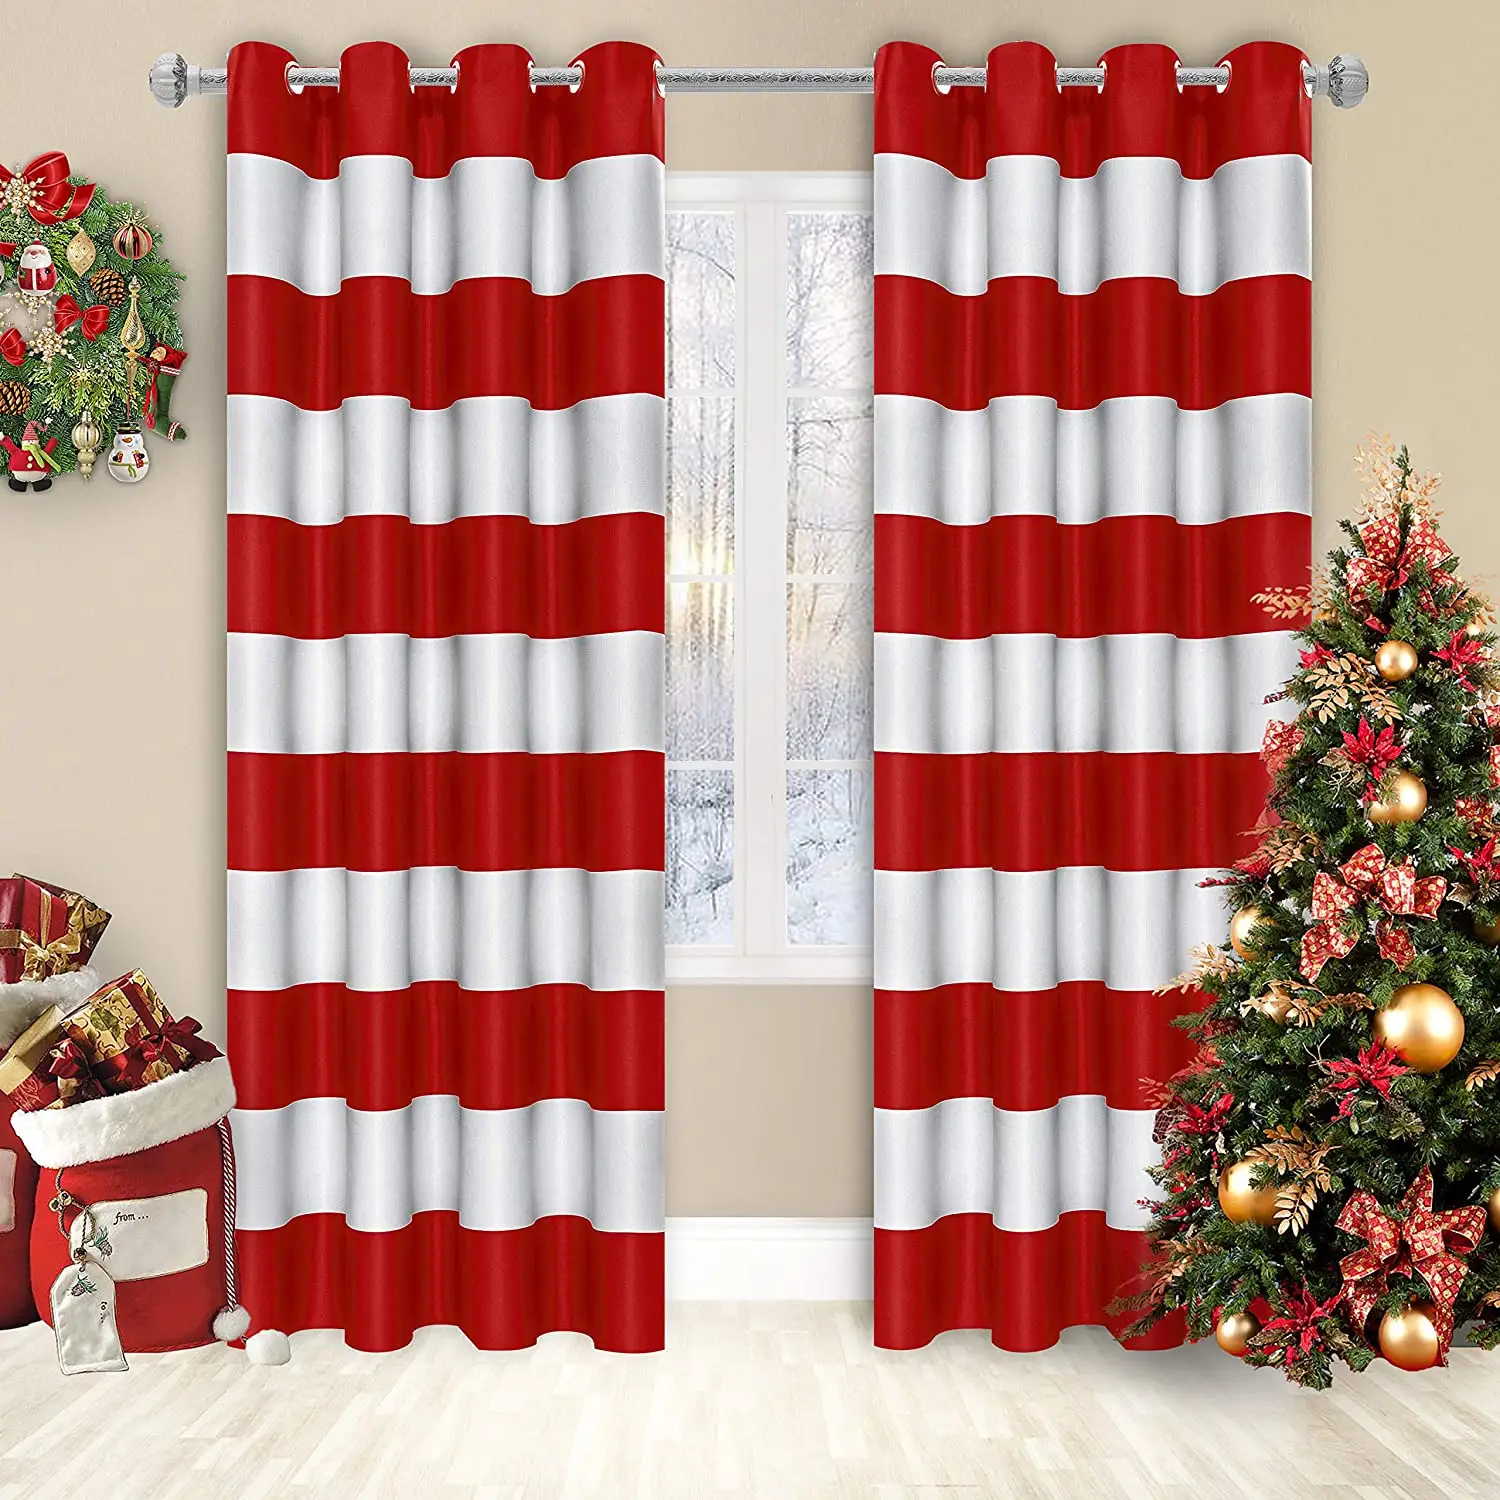 Merry Christmas Grommet Blackout Curtain Light Blocking Curtain Red Striped Curtain For Living Room Bedroom Cortinas